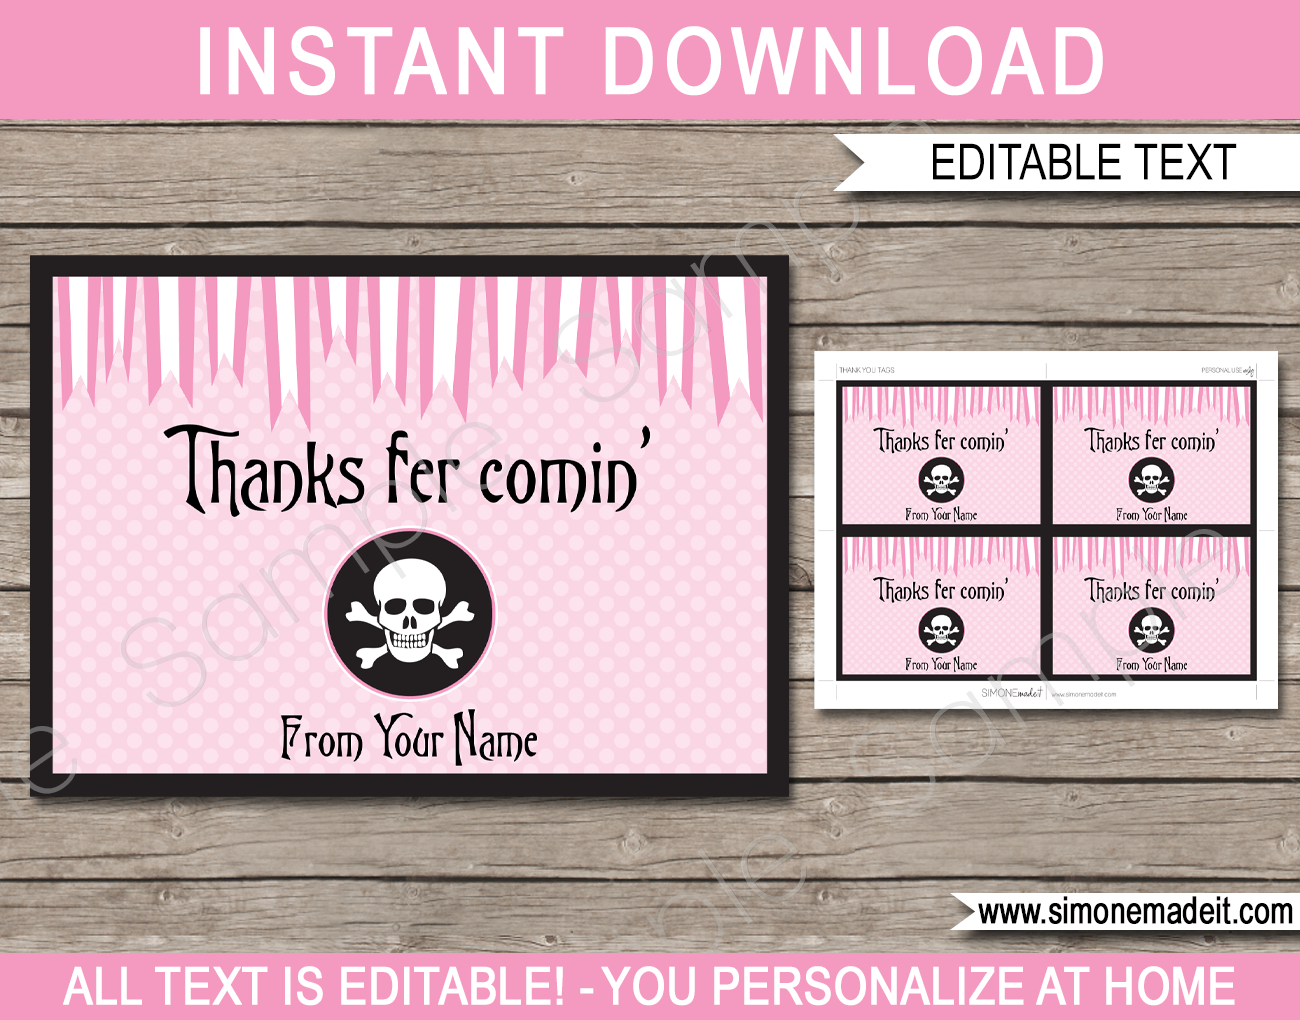 Pink Pirate Birthday Party Favor Tags | Thank You Tags | Editable DIY Template | $3.00 INSTANT DOWNLOAD via SIMONEmadeit.com